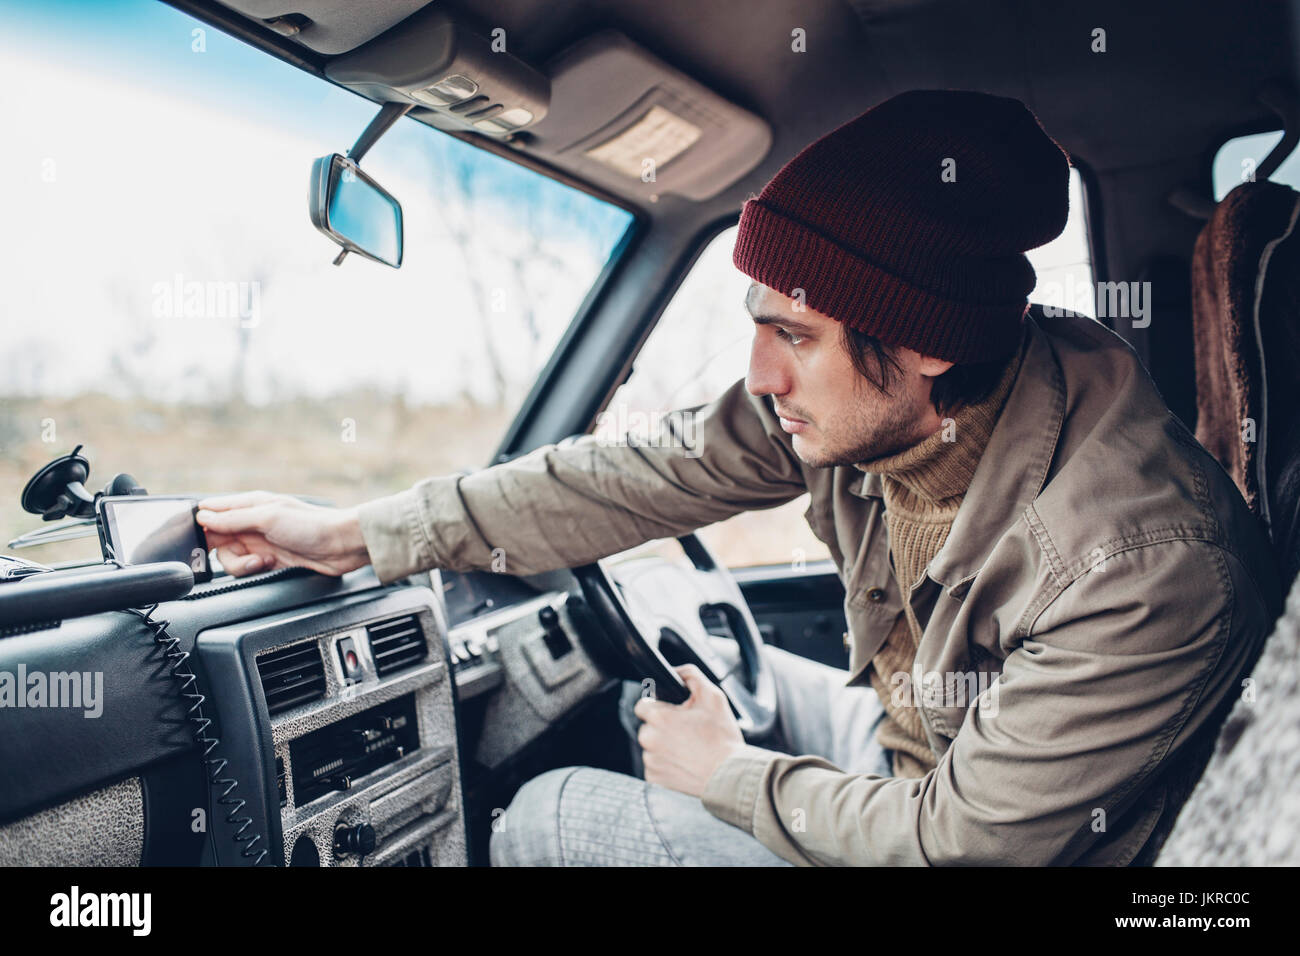 Man wearing knit hat and adjusting smart phone on dashboard of sports utility vehicle Stock Photo